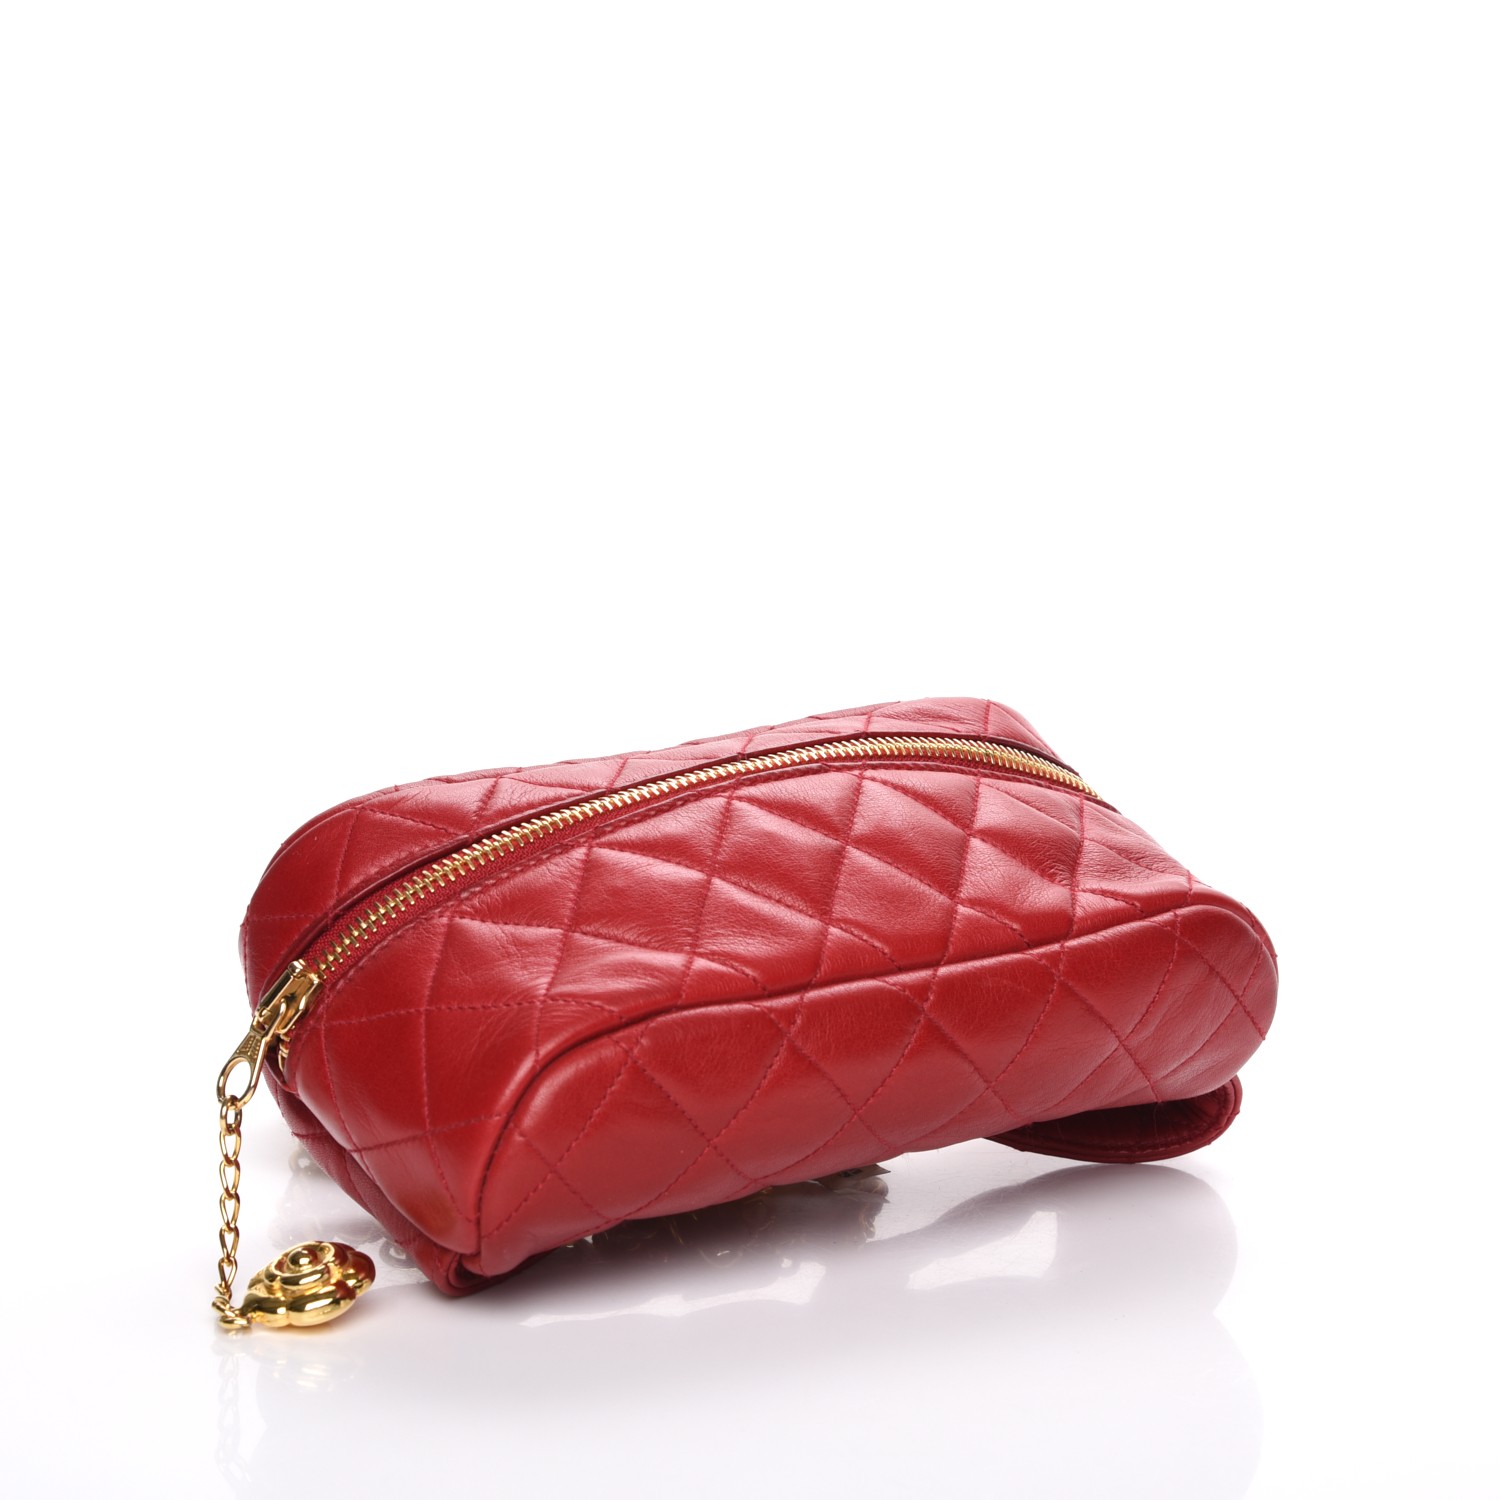 CHANEL Lambskin Quilted Belt Bag Red 215356